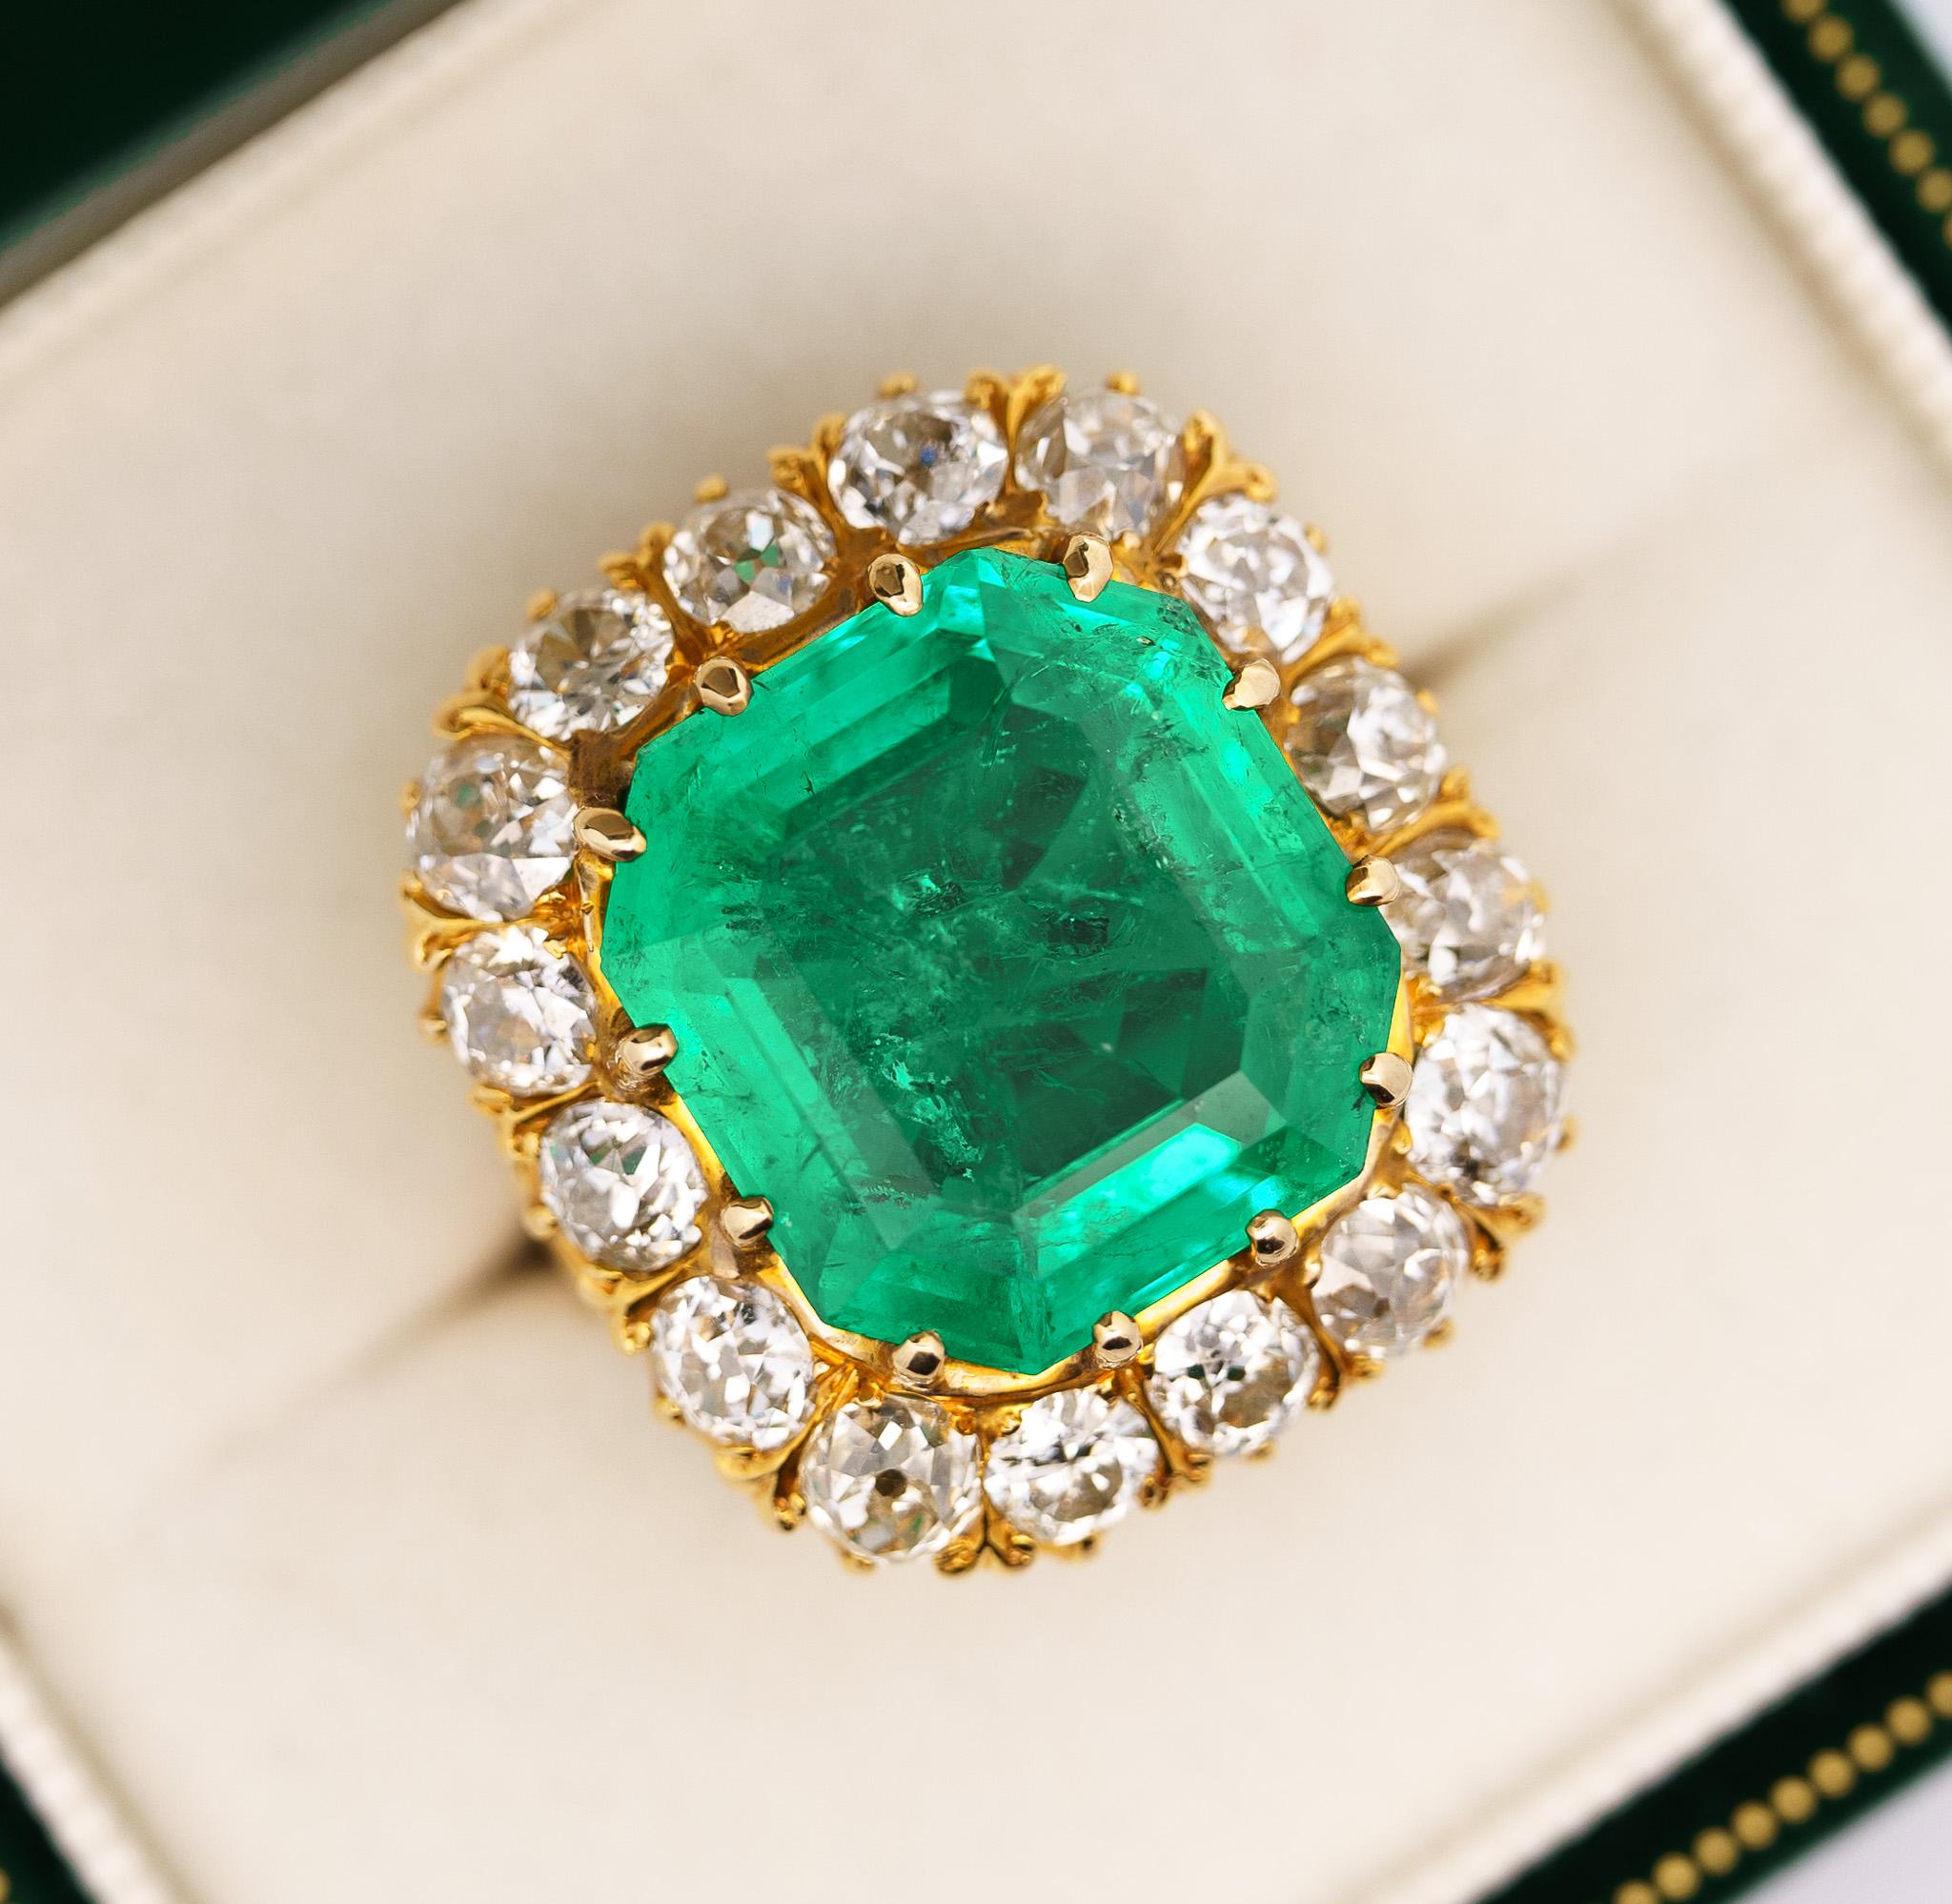 GRS Certified Vintage 14.51 Carat Octagonal Cut Insignificant Oil Colombian Emerald & Old European Cut Diamond in Carved 14K Gold Retro Style Ring Shank. 

The emerald bears phenomenal luster, color, and transparency. A gem of this size, quality,